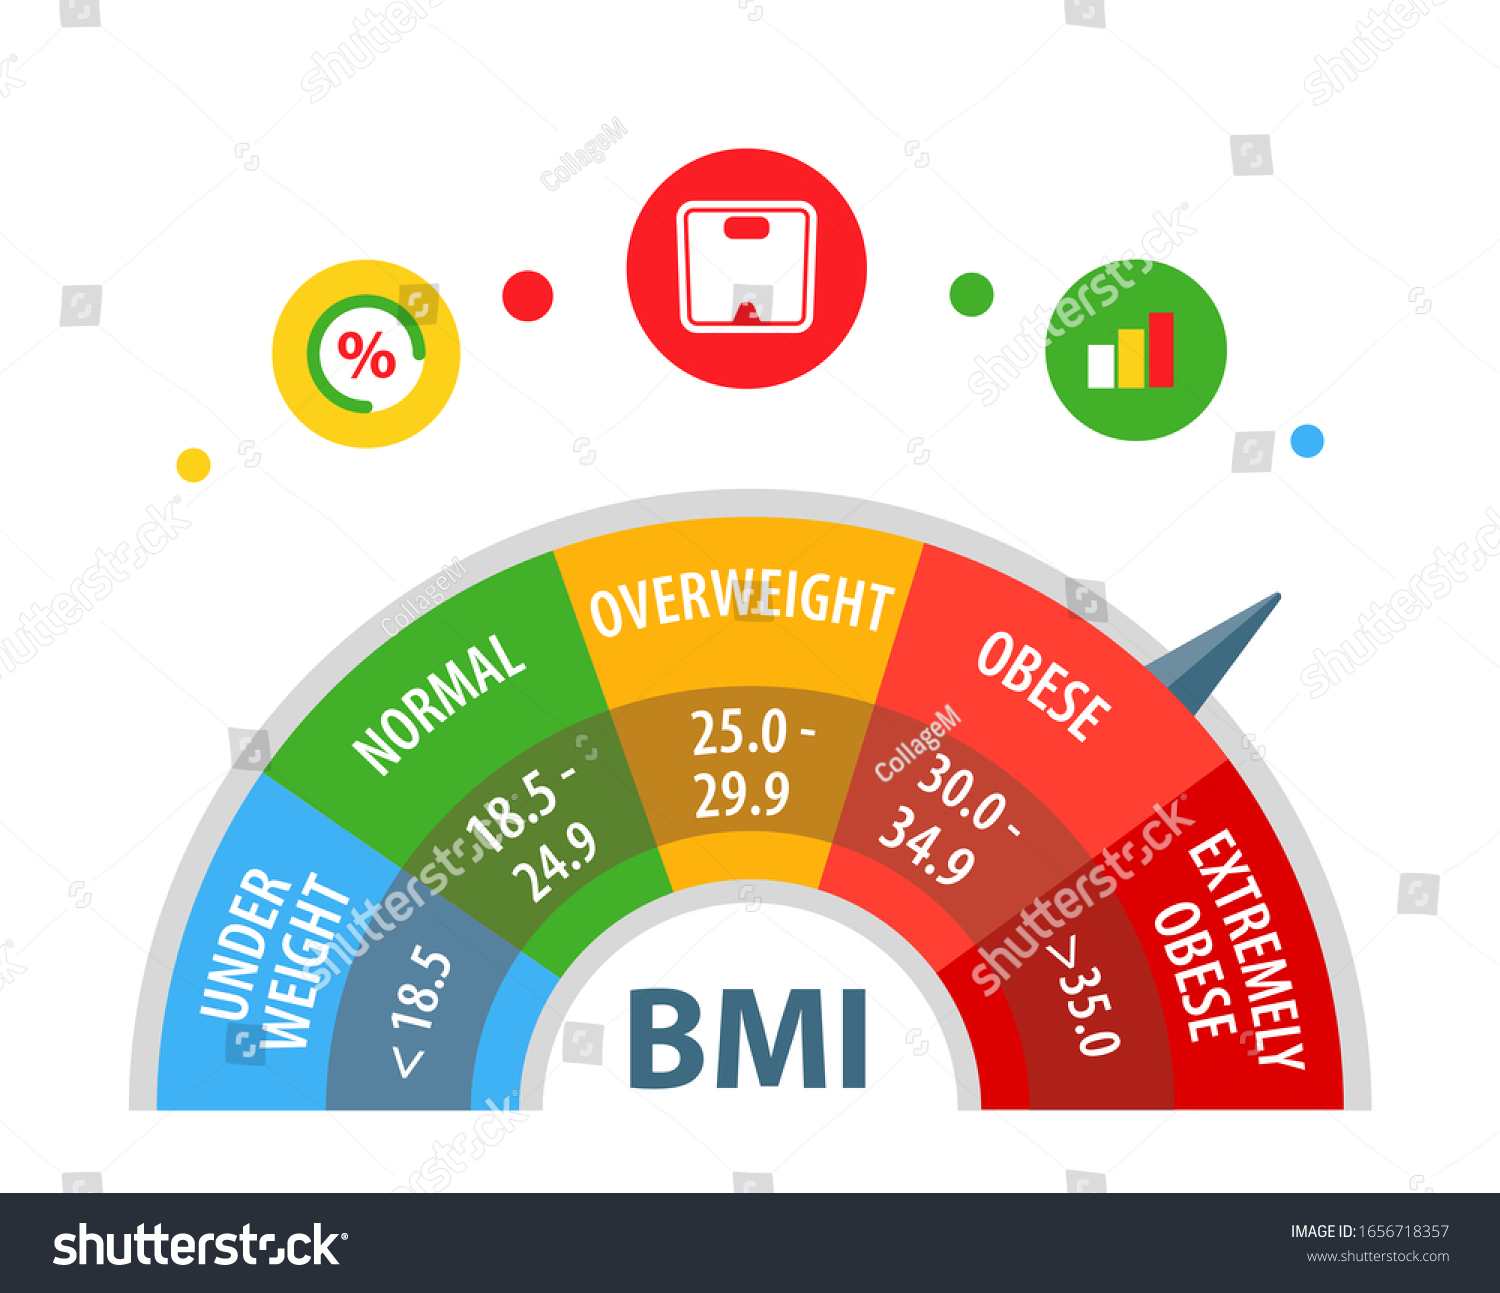 Body Mass Index Body Weight Index Bmi Vector Royalty Free Stock Vector 1656718357 6838